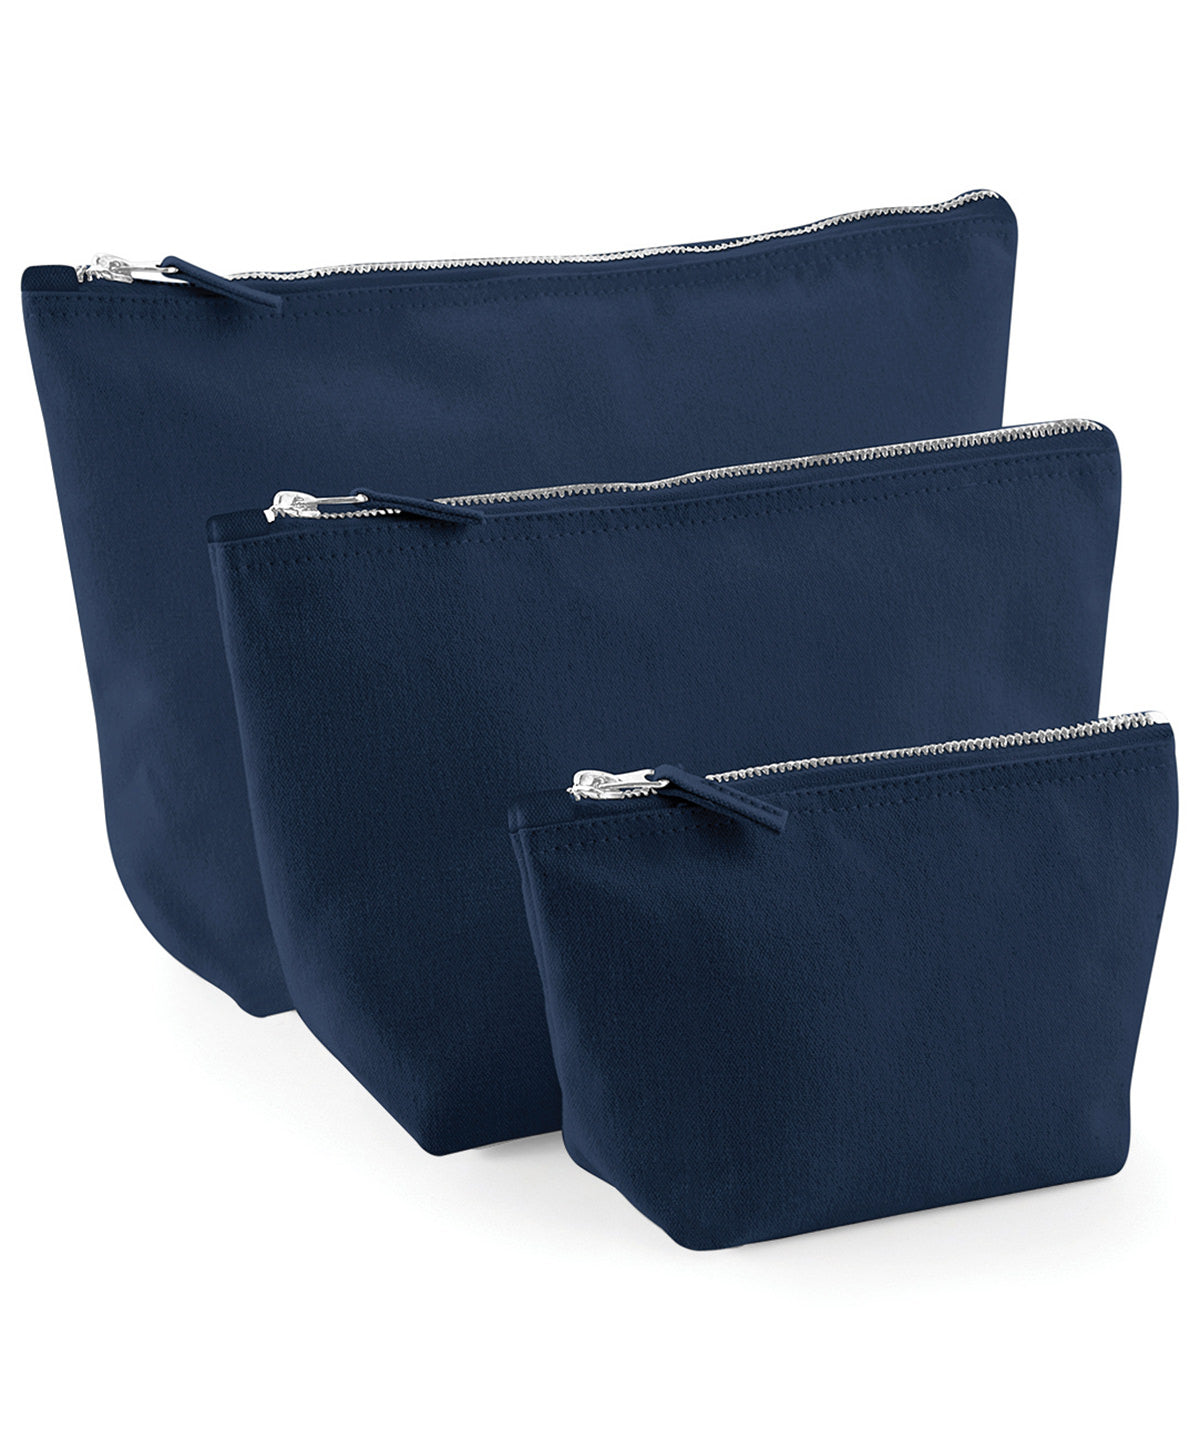 Set Of 3 Canvas Accessory Bags